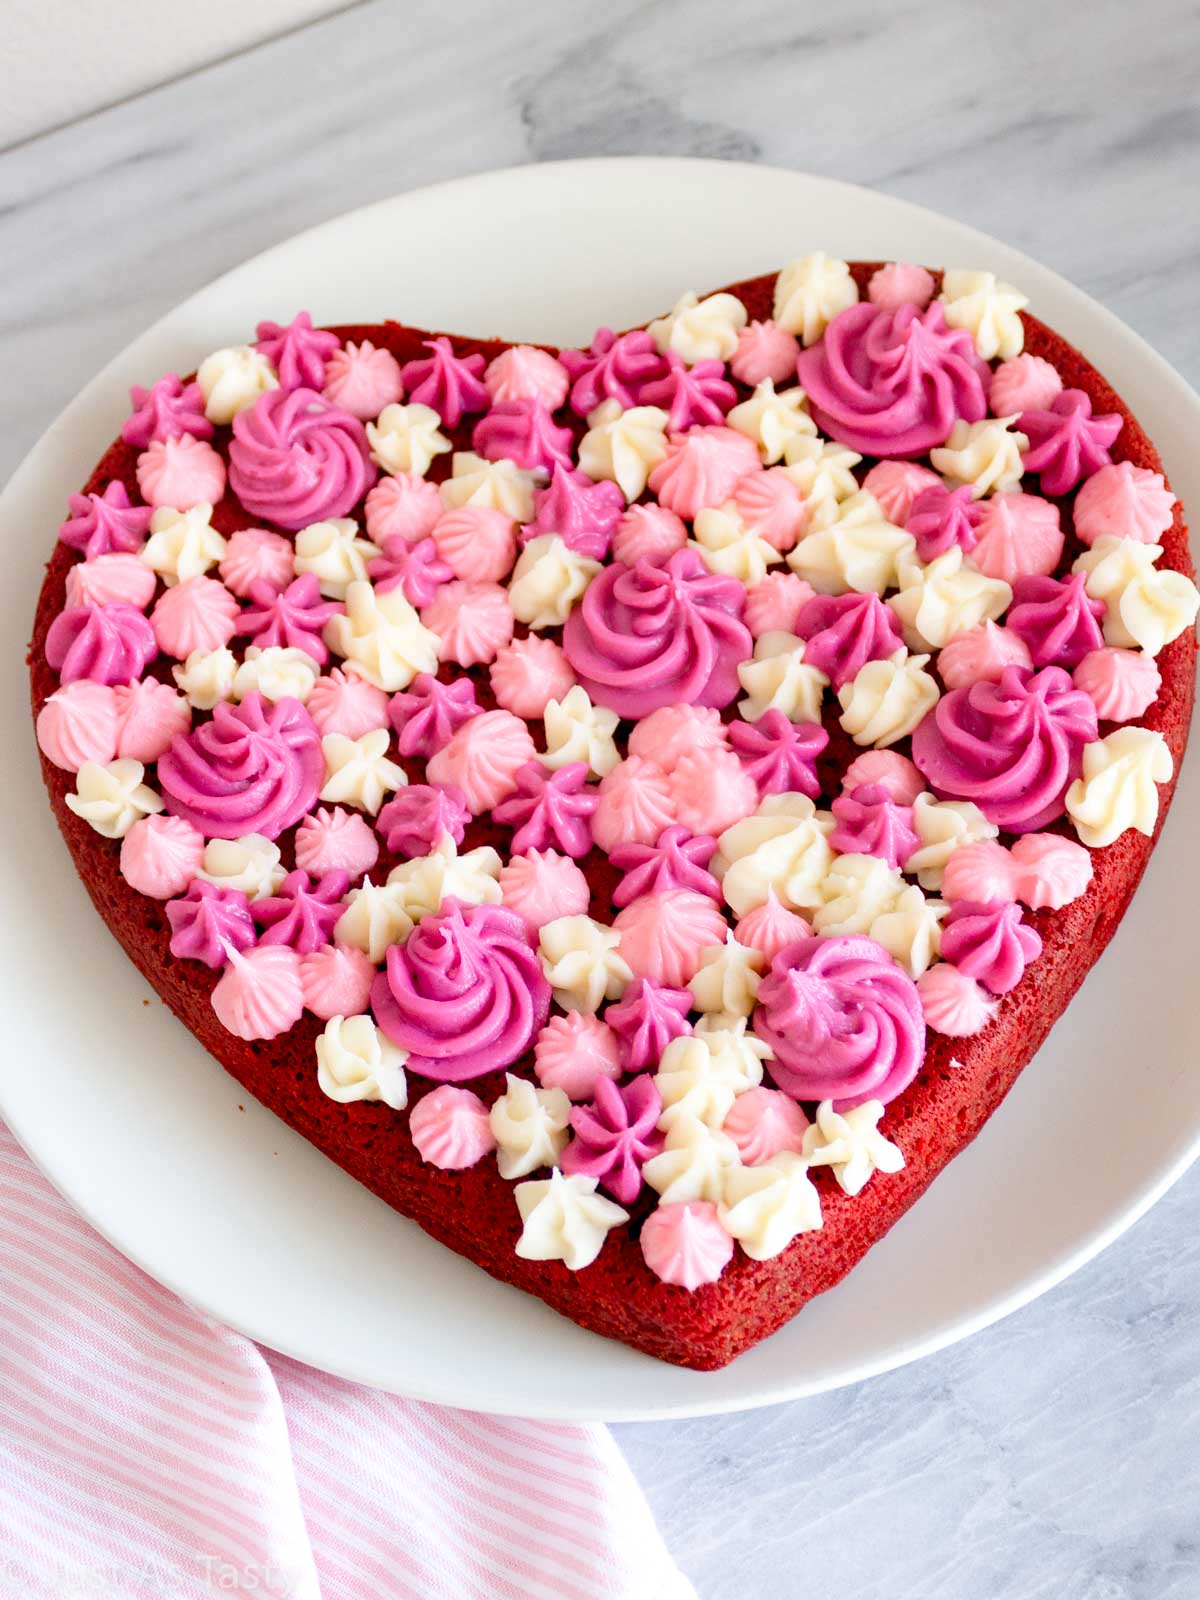 Heart shaped gluten free red velvet cake with pink and white piped cream cheese frosting on top.